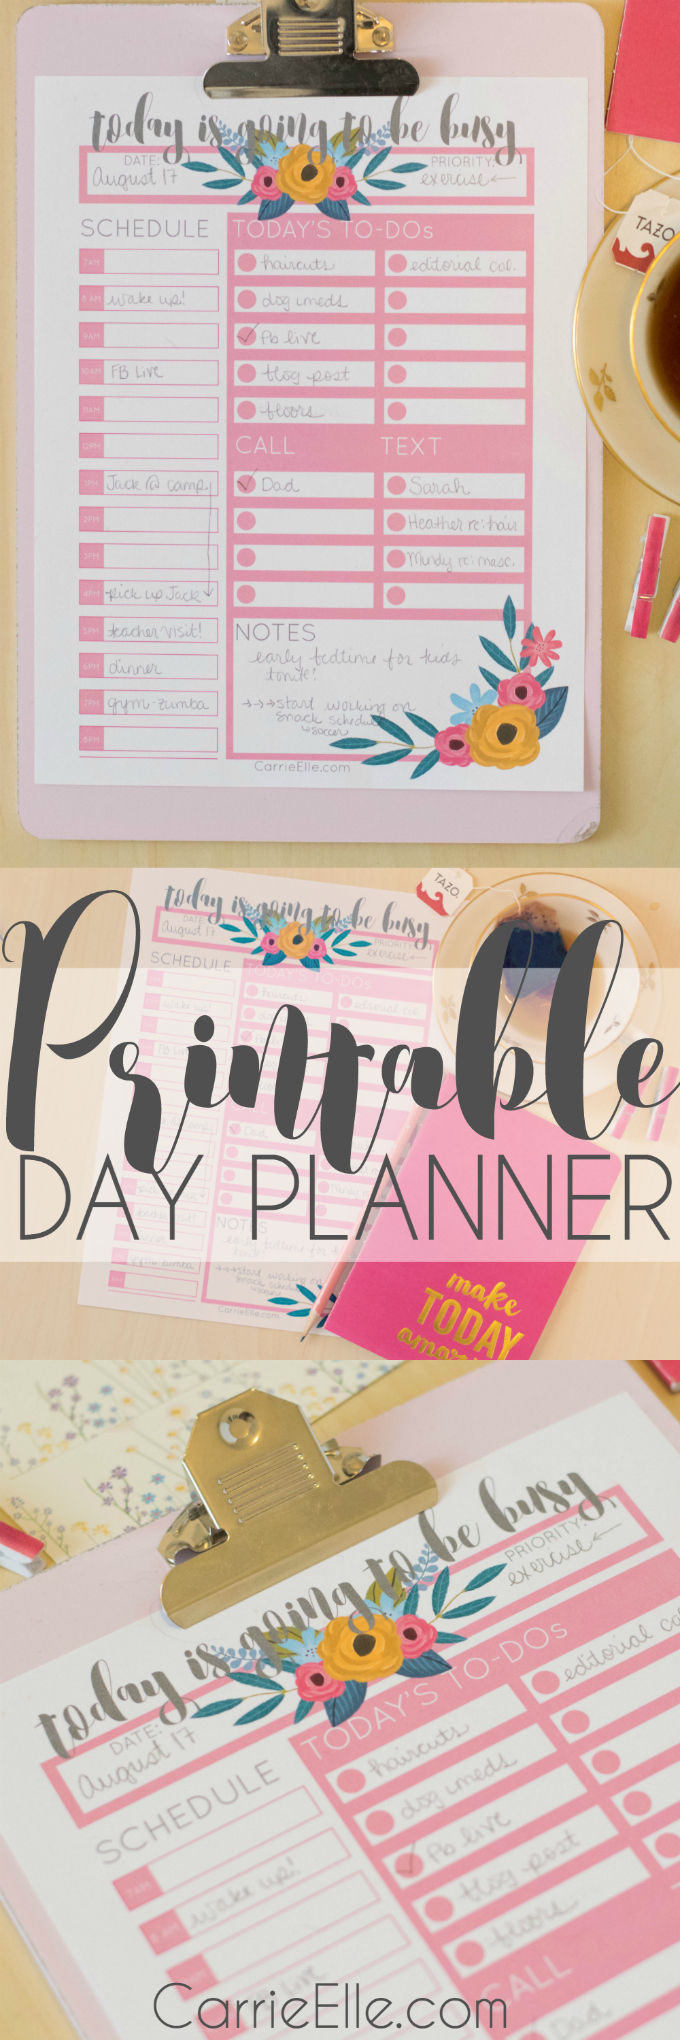 Printable Day Planner